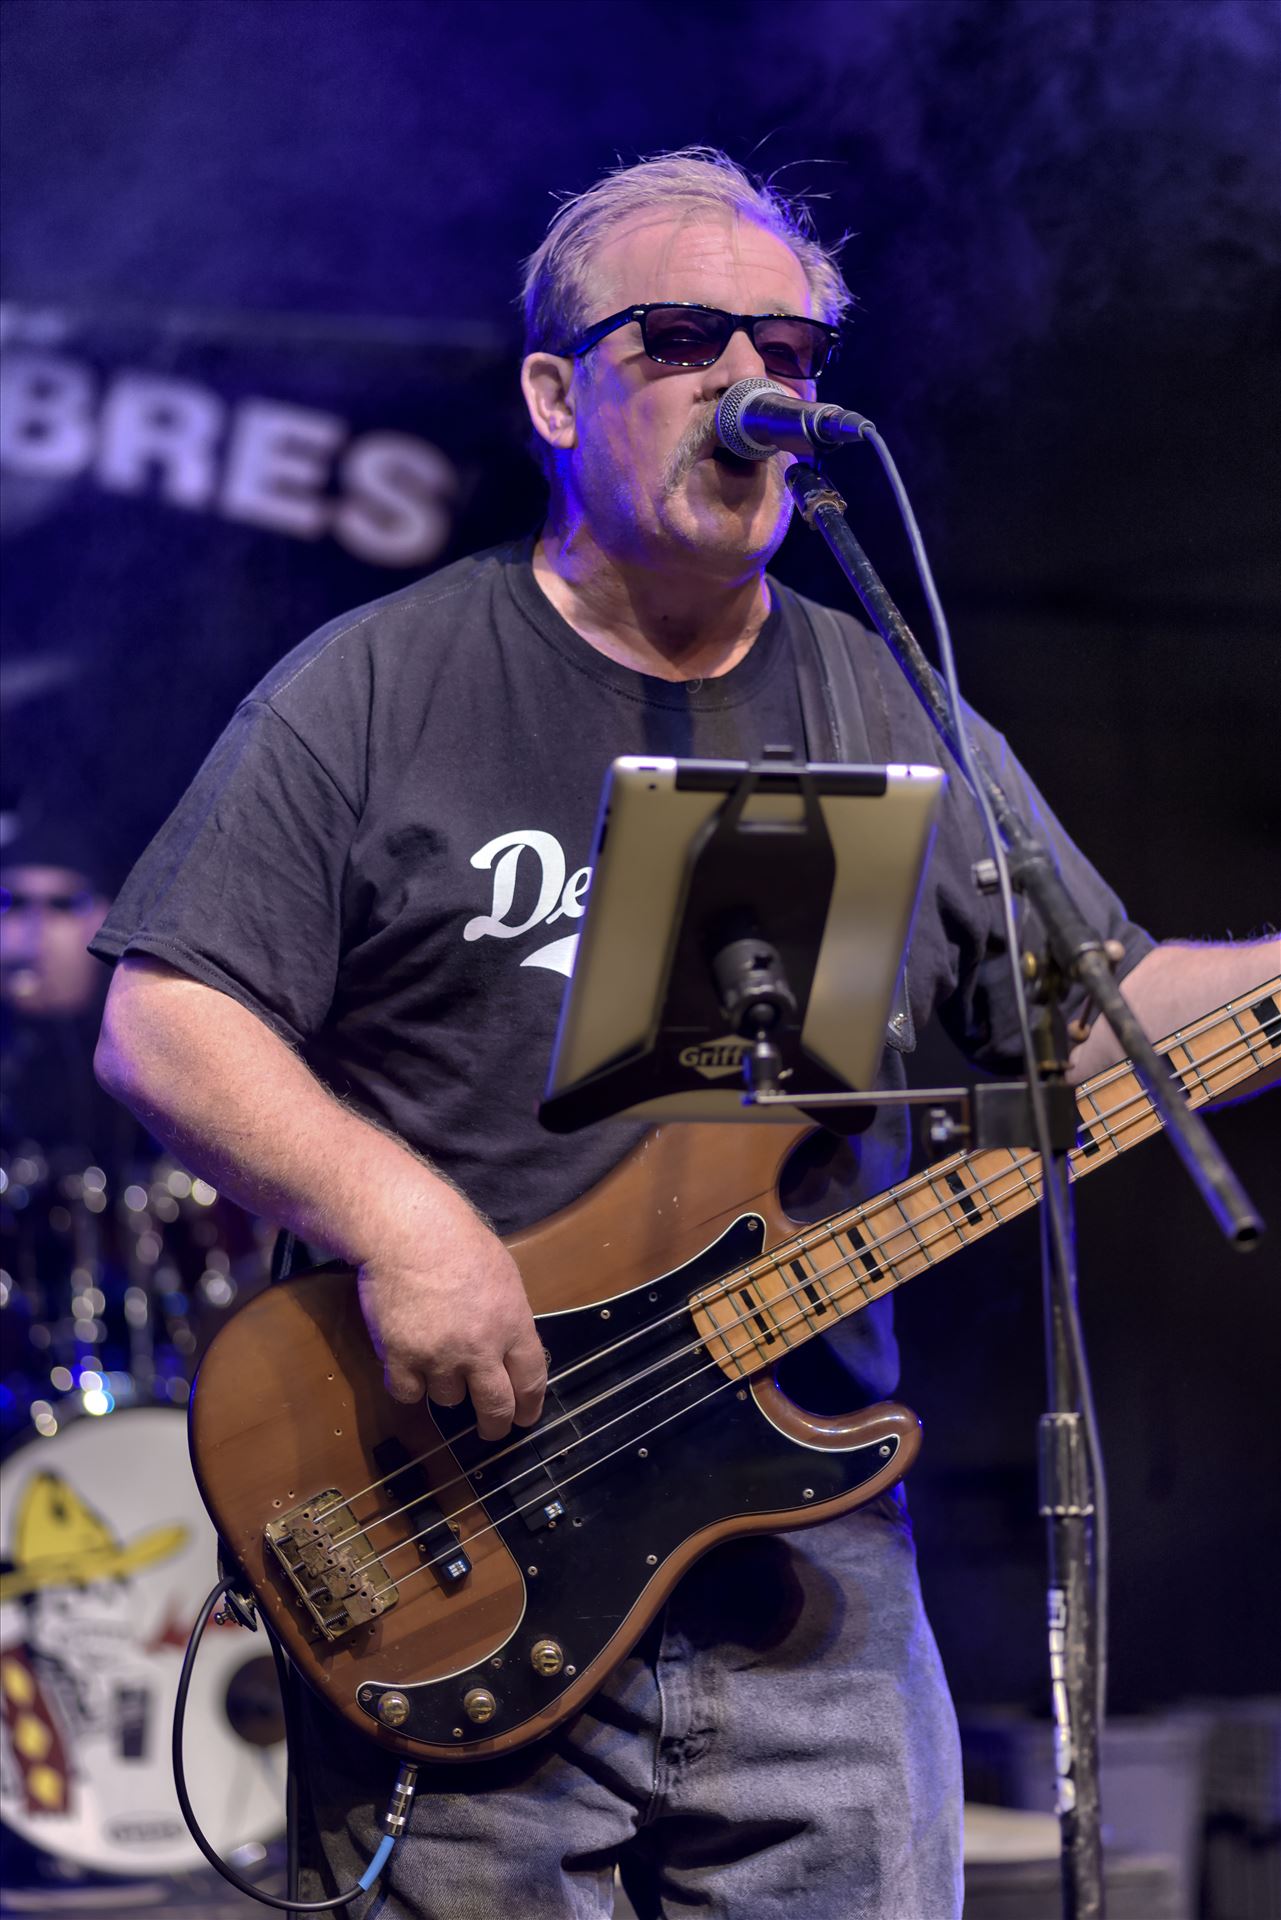 Trezz Hombres at Club Lavela RAW_2338.jpg -  by Terry Kelly Photography